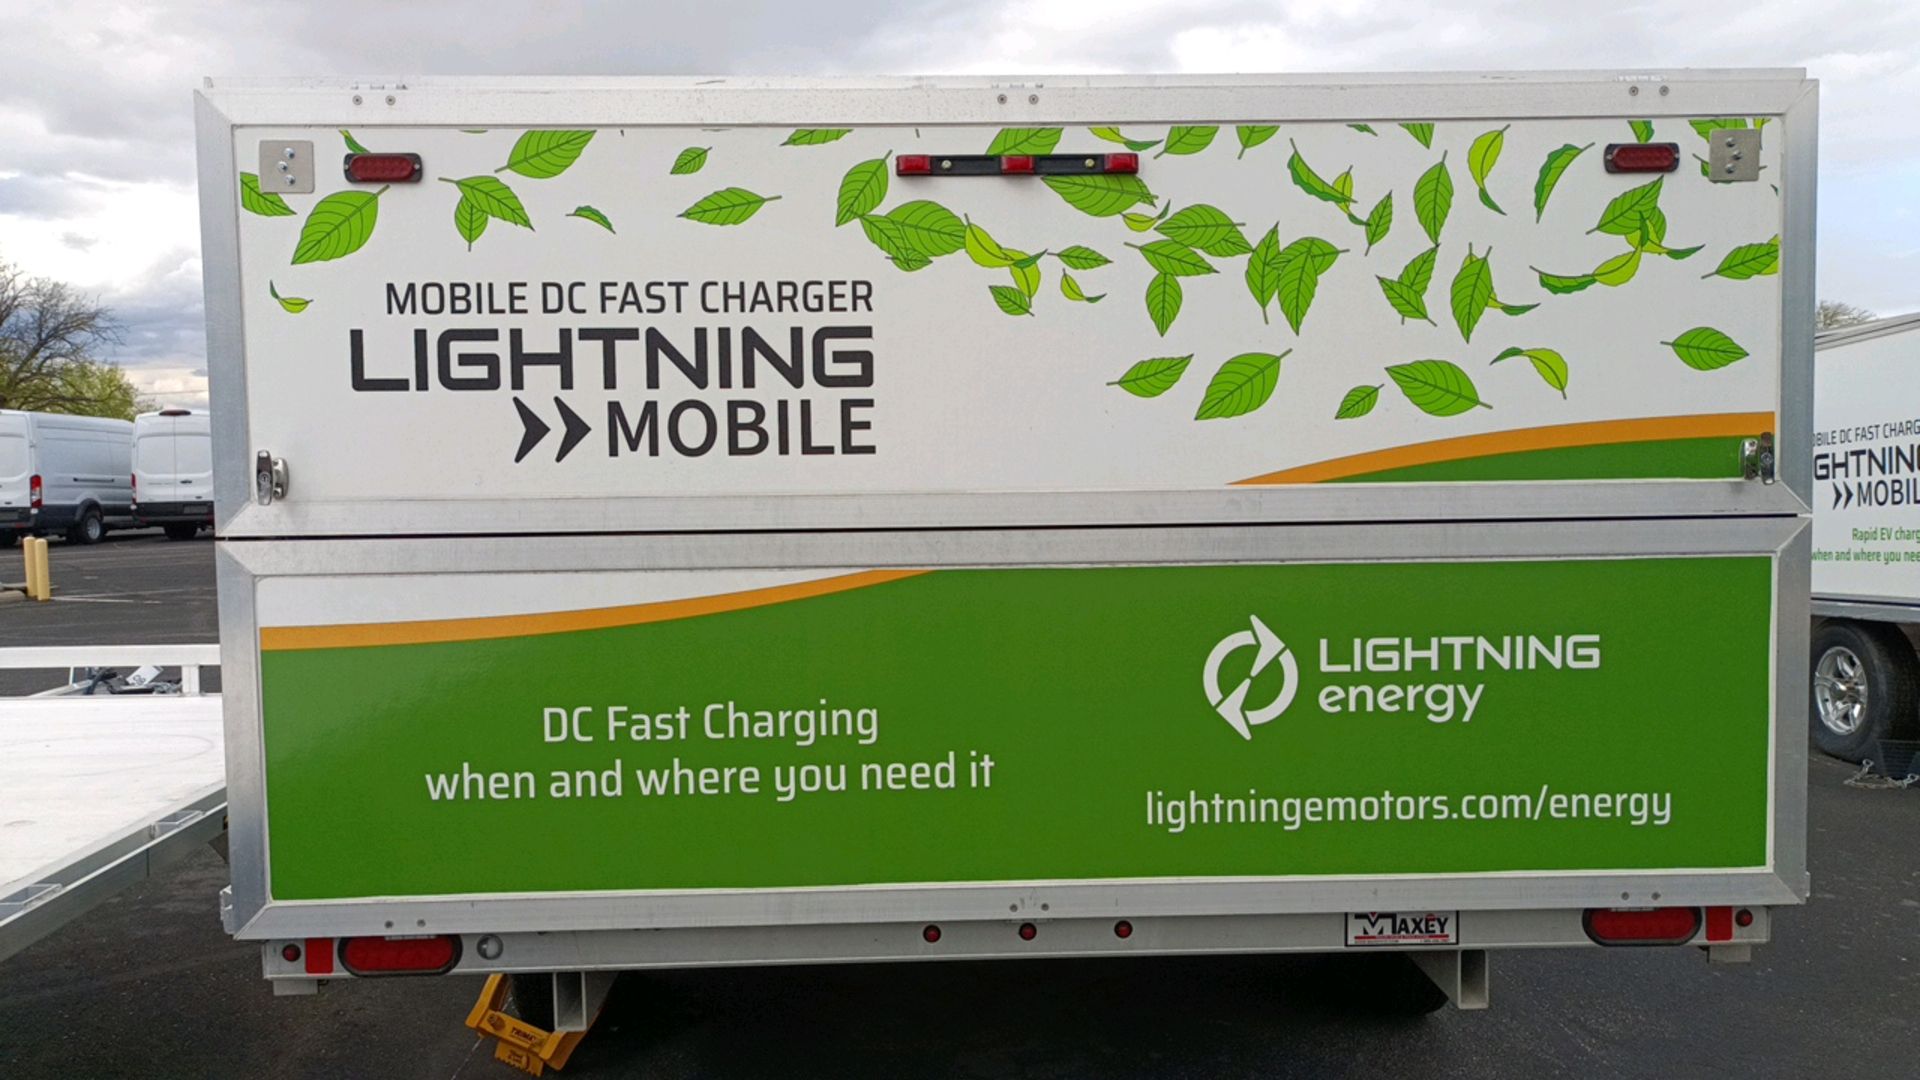 Mobile DC Fast Charger - Image 5 of 7